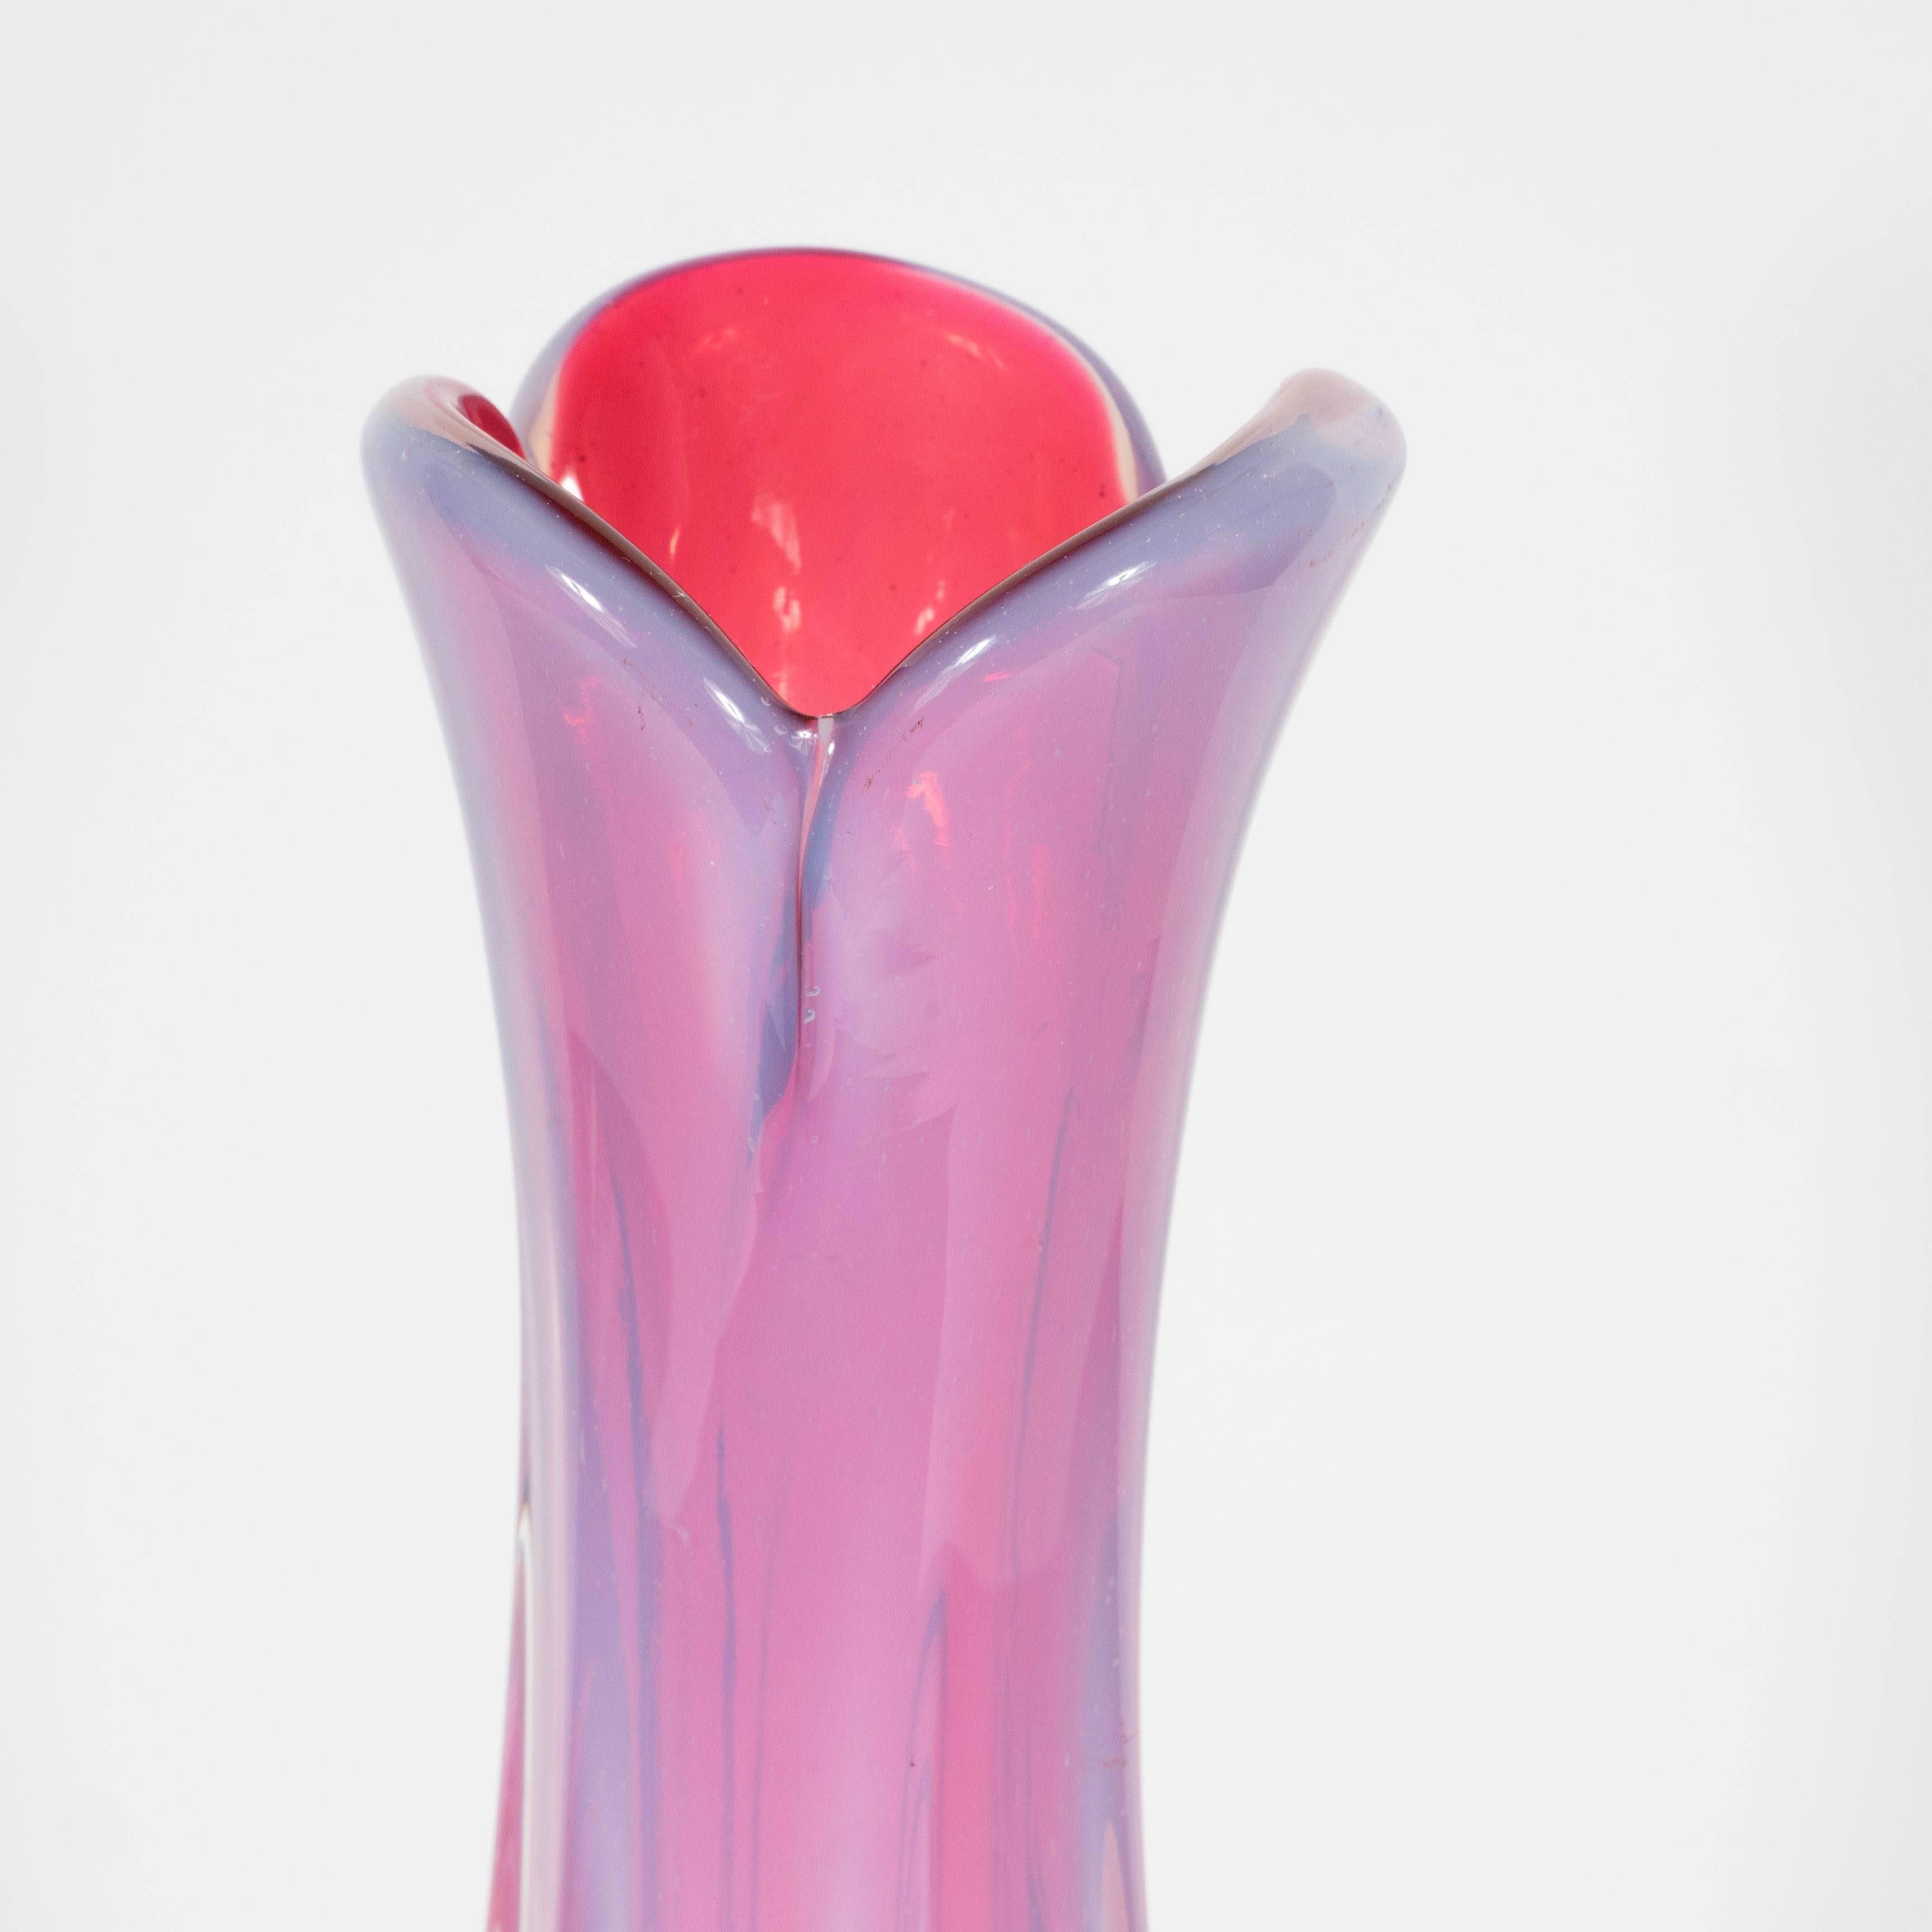 This sophisticated Mid-Century vase features six translucent fins protruding from the gently tapered and elongated body. The vase was handblown, circa 1950, in Murano- the legendary Venetian island renowned for centuries for its glass production.